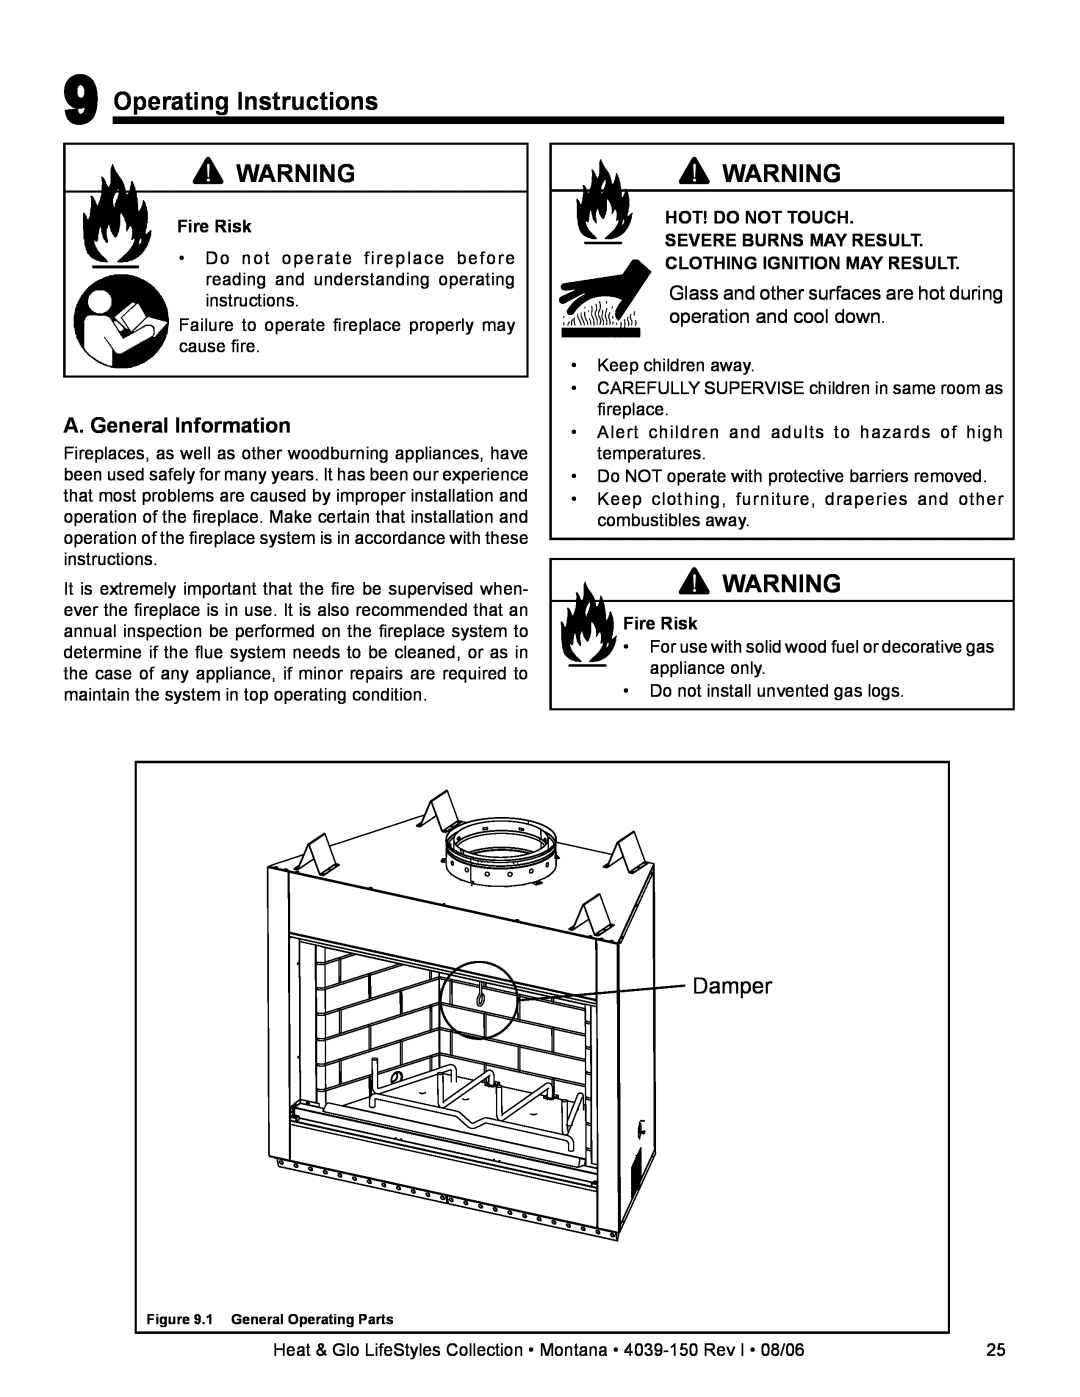 Heat & Glo LifeStyle Montana-36 Operating Instructions, Damper, Glass and other surfaces are hot during, Fire Risk 